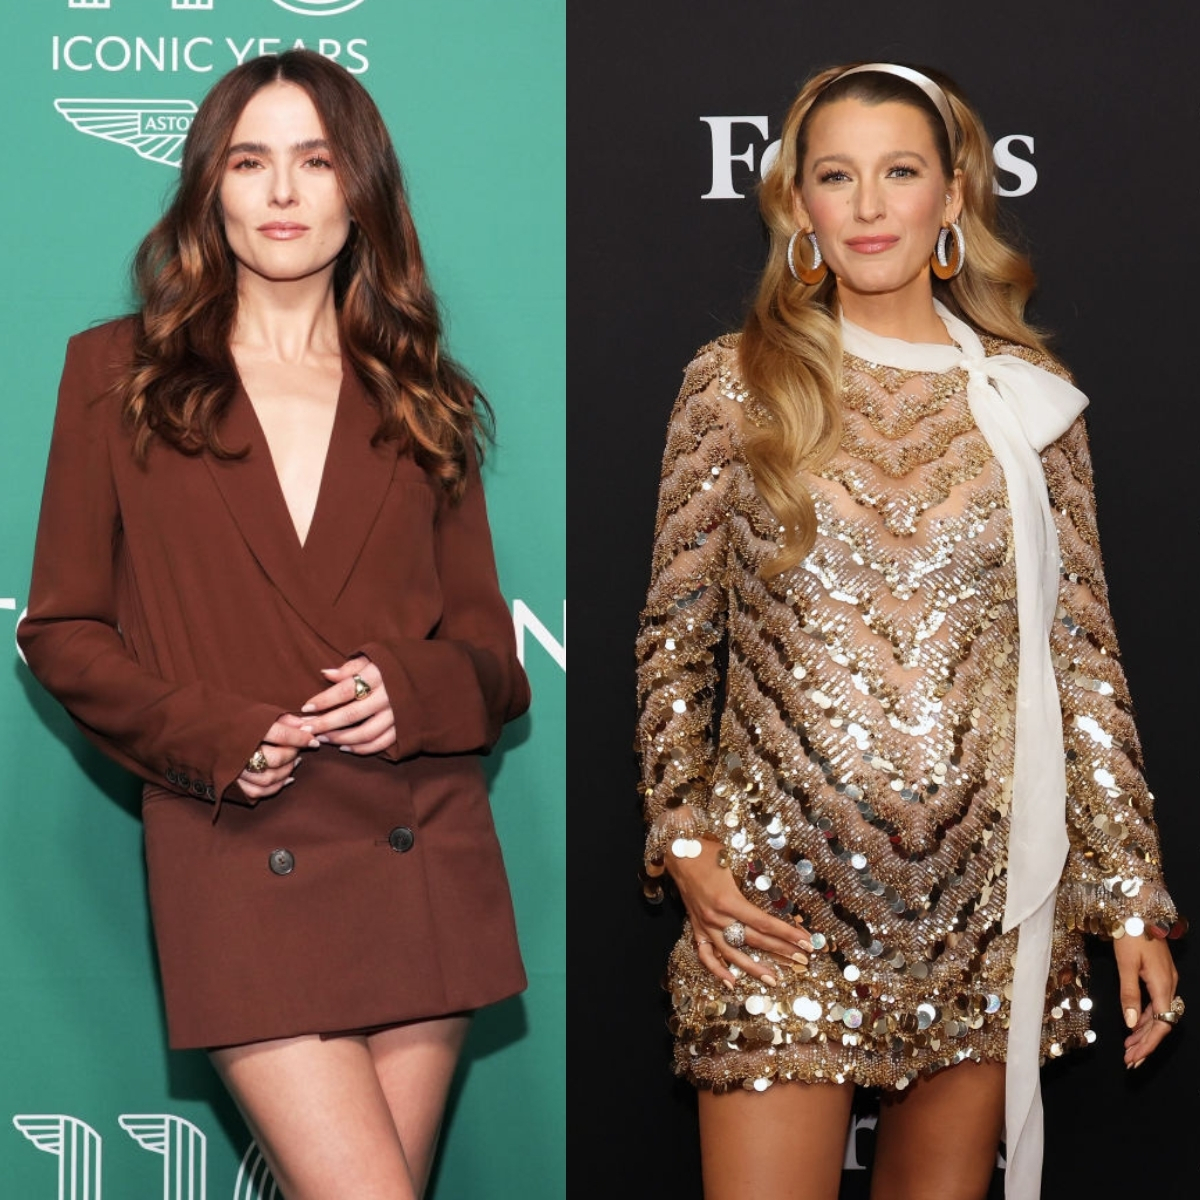 Blake Lively, Zoey Deutch & More You Didn’t Know Have Famous Relatives